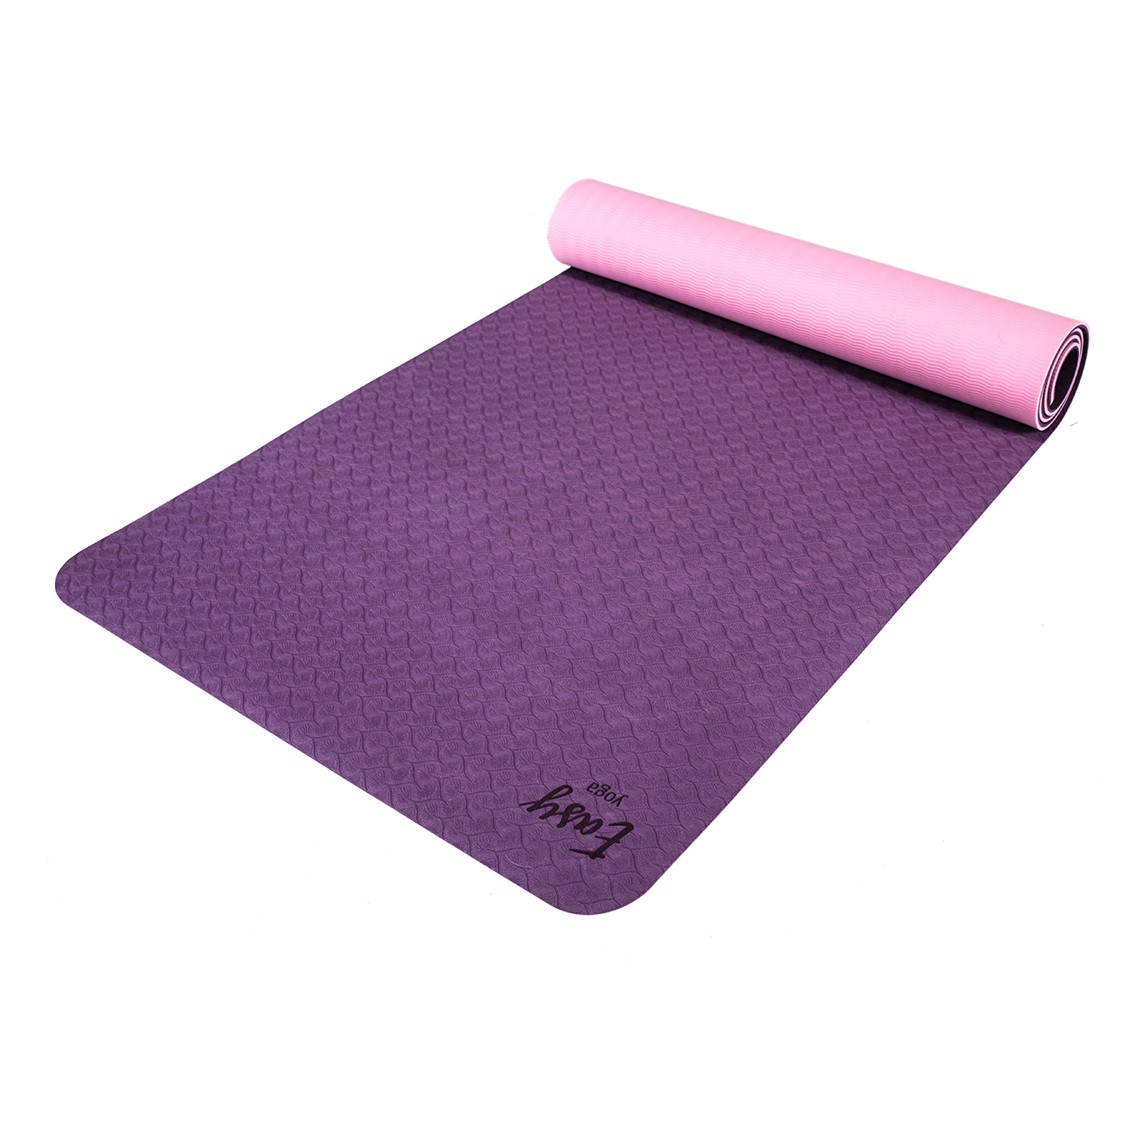 DOUBLE LAYER YOGA MAT 6MM EASY YOGA : Kolor - Fioletowy